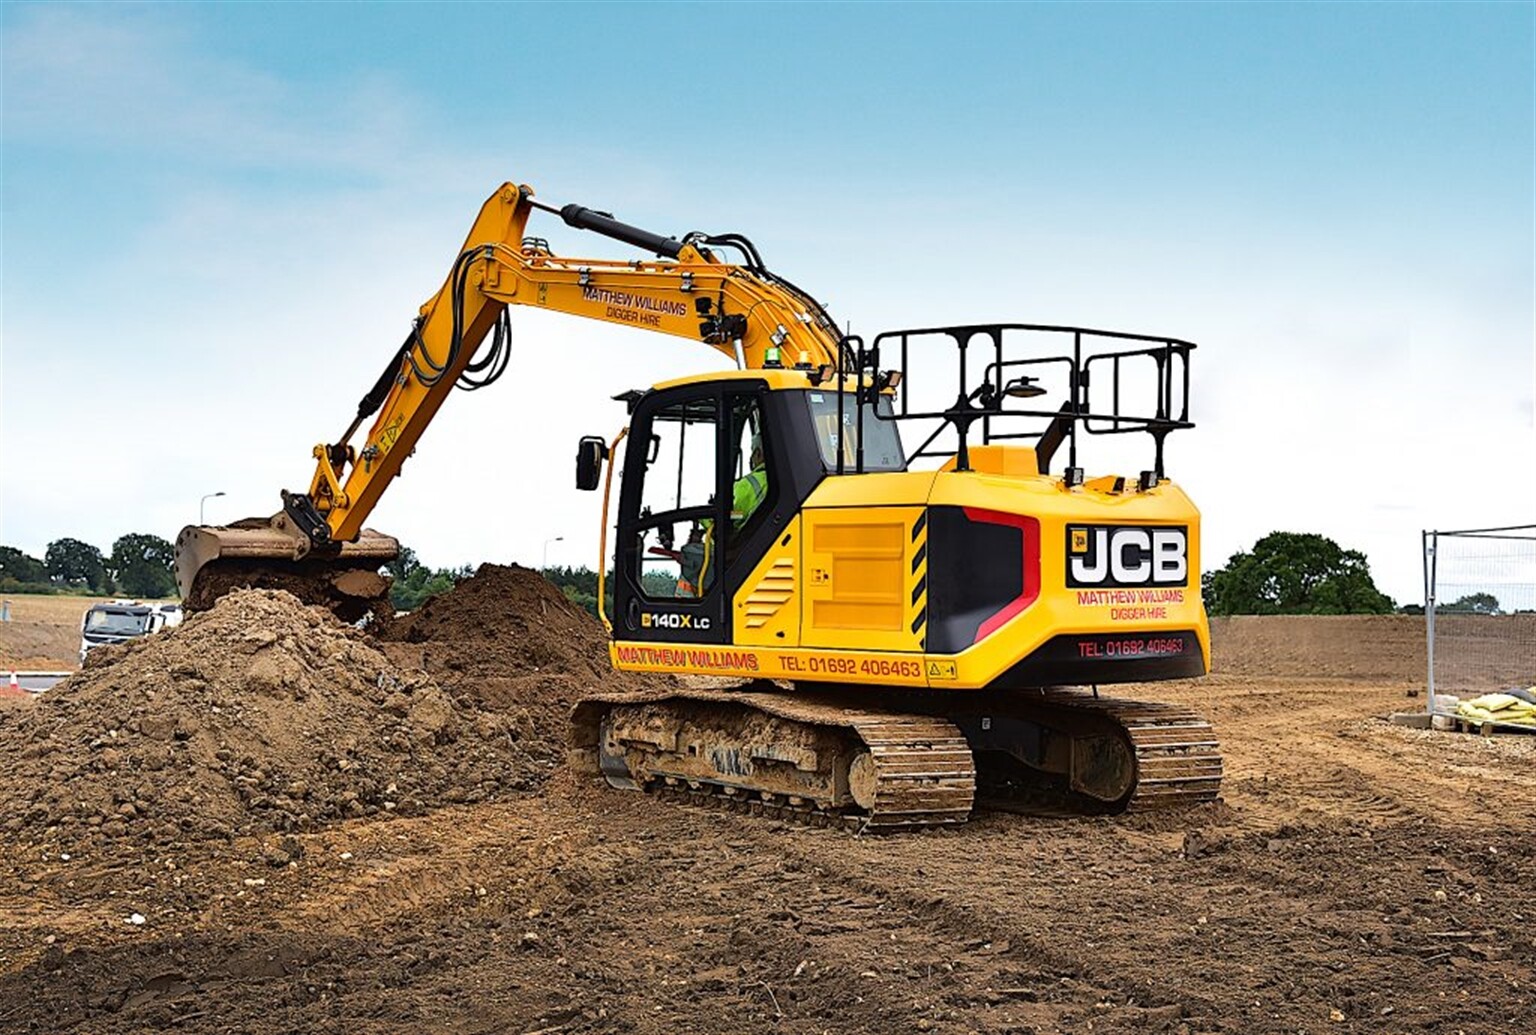 JCB X Series Cab A Great Place to Spend a Shift Says Hirer